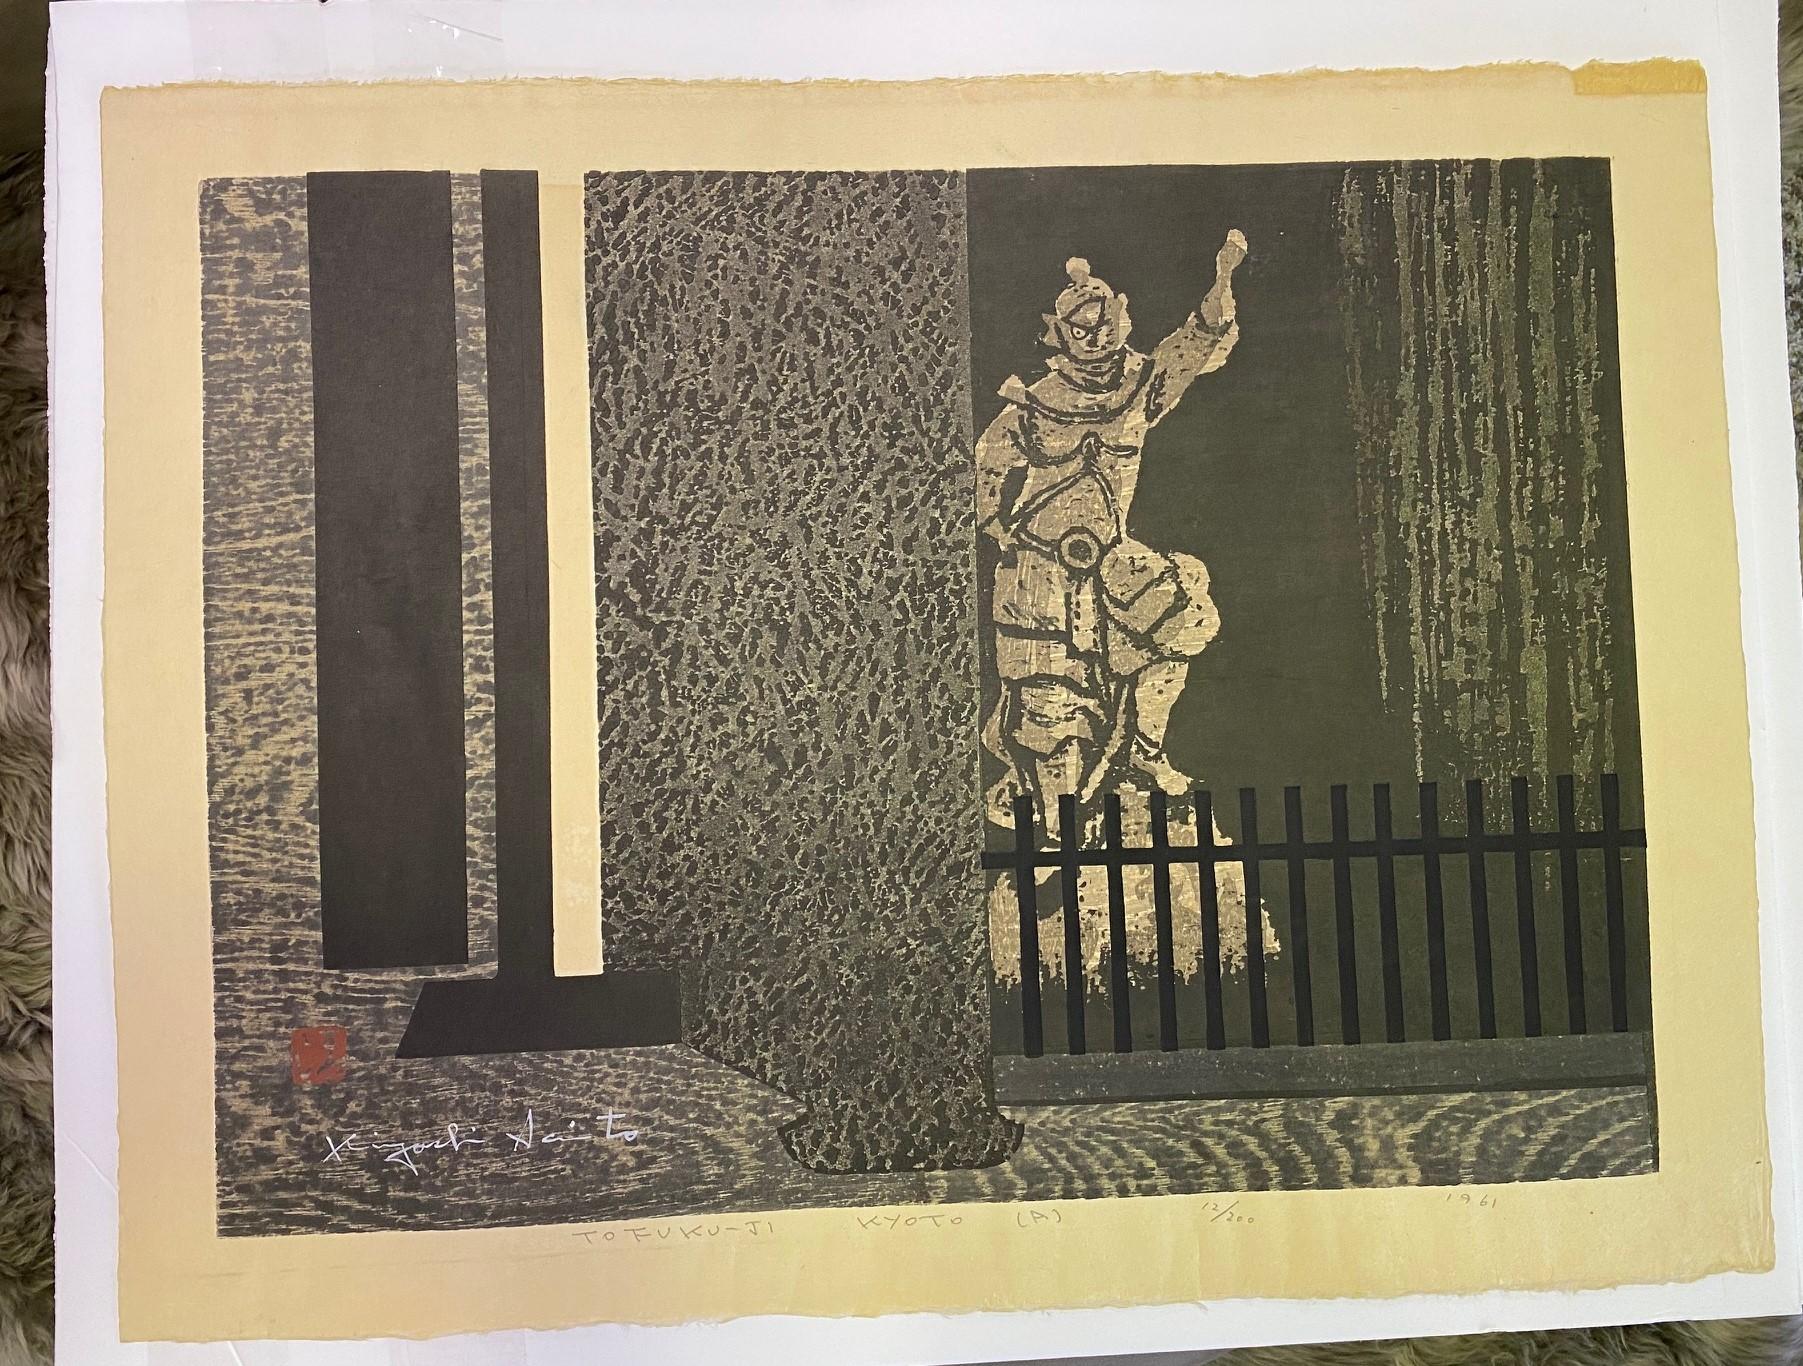 A wonderfully composed woodblock print by famed Japanese printmaker Kiyoshi Saito. Many consider Saito to be one of the most important, if not the most important, contemporary Japanese printmakers of the 20th century. This print is of a temple